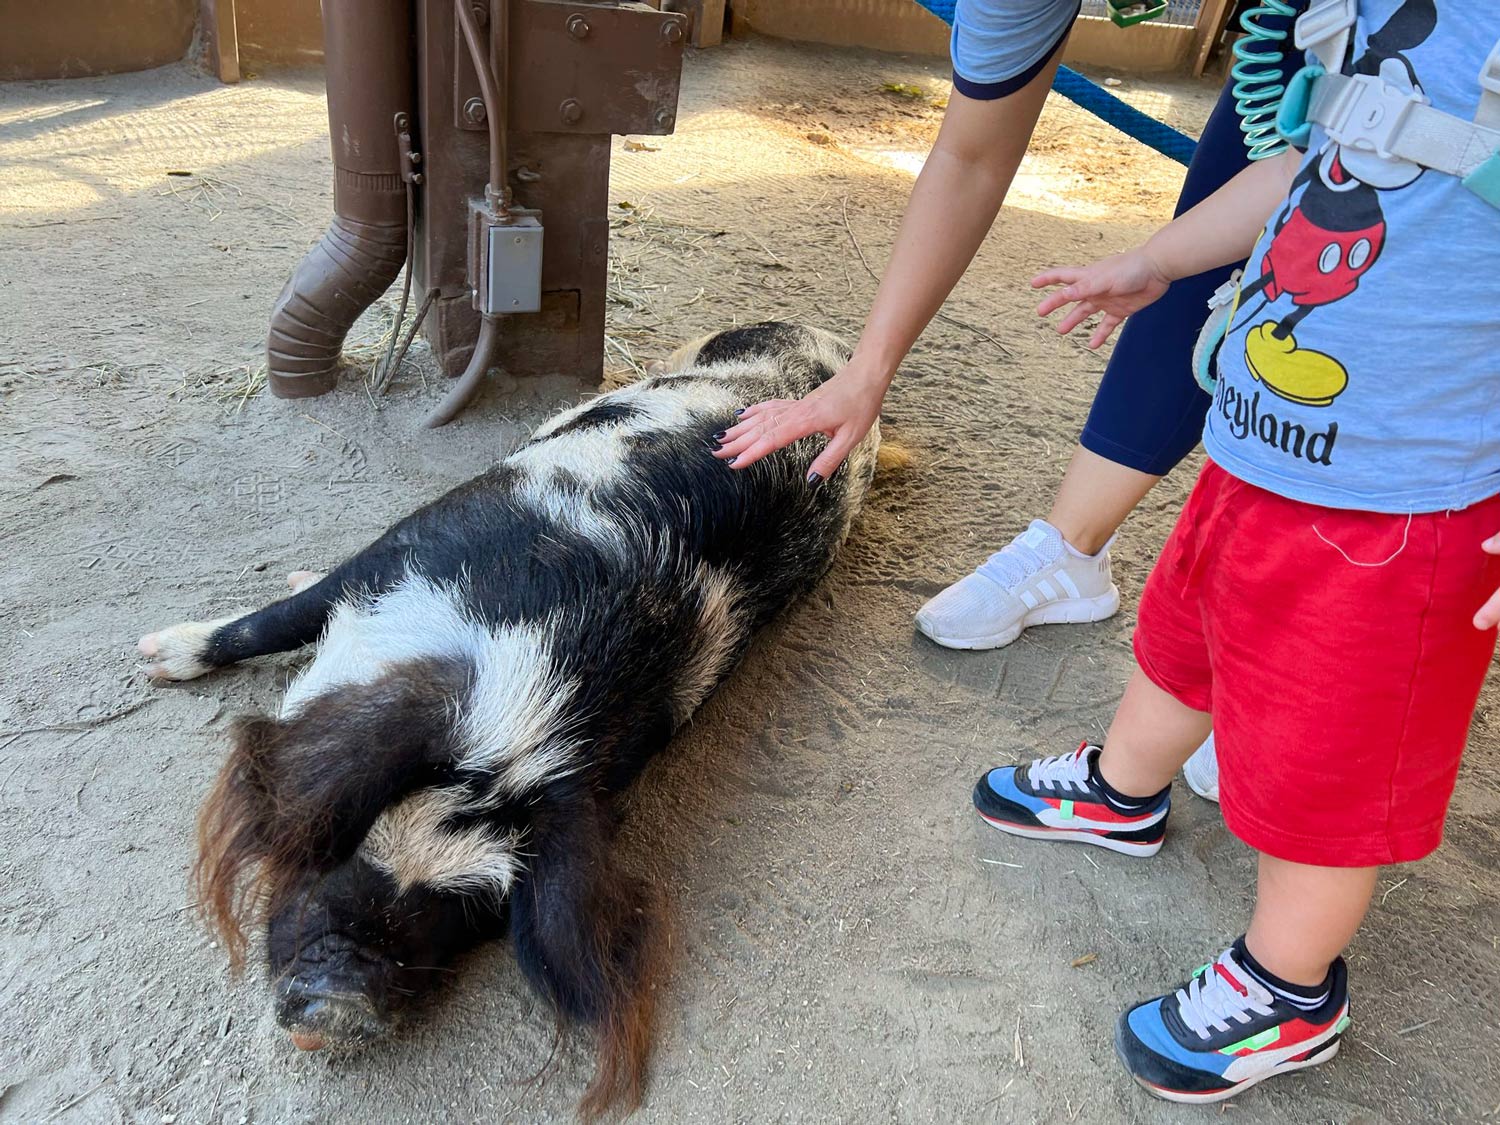 Affection Section - Petting Zoo at Animal Kingdom for Toddlers